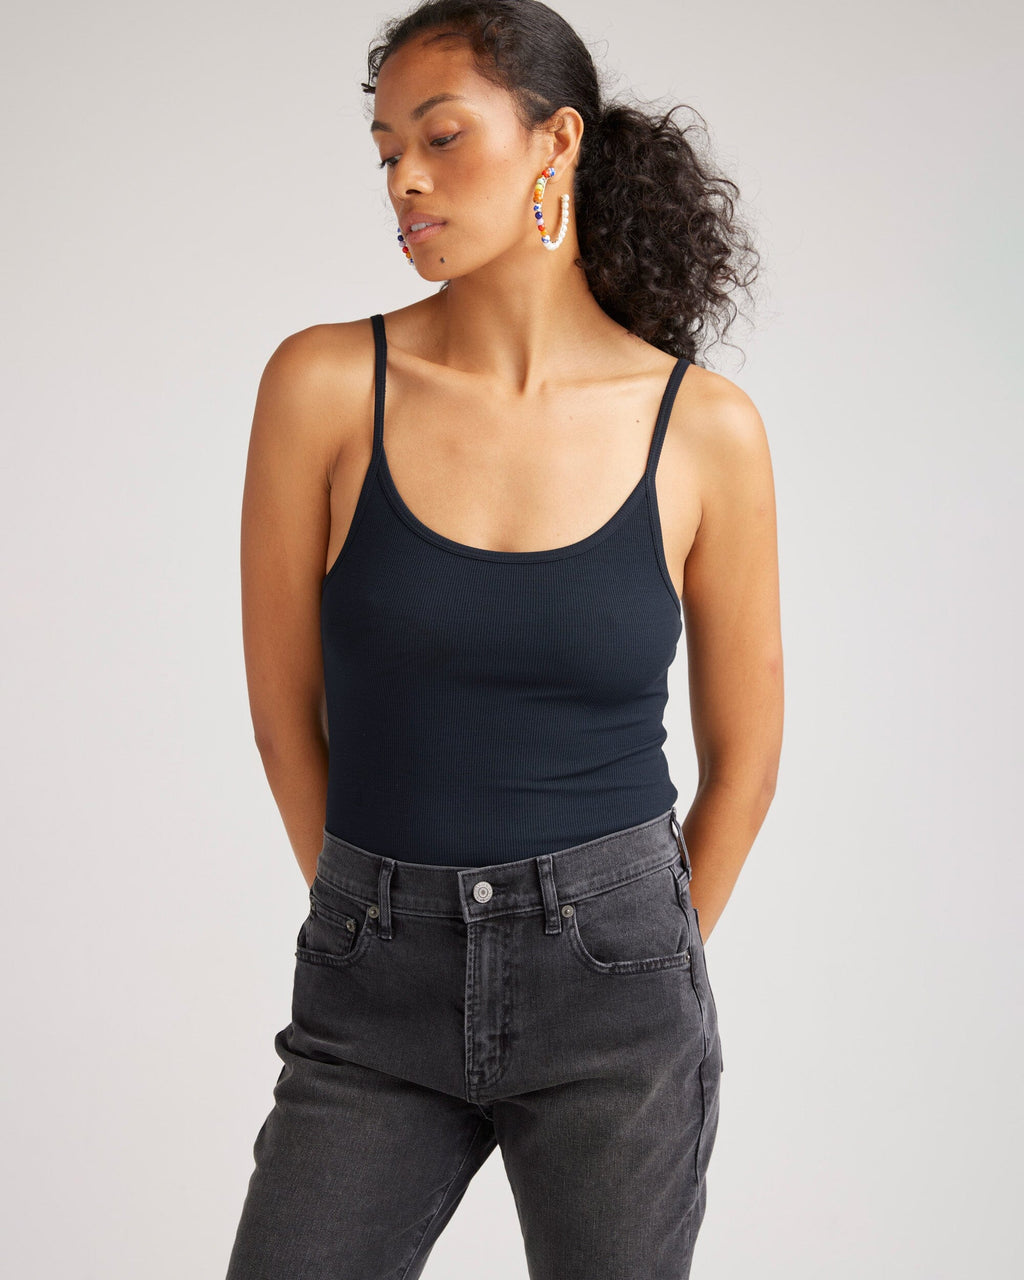 I Can Go Braless in These Ultra-Flattering  Bodysuits